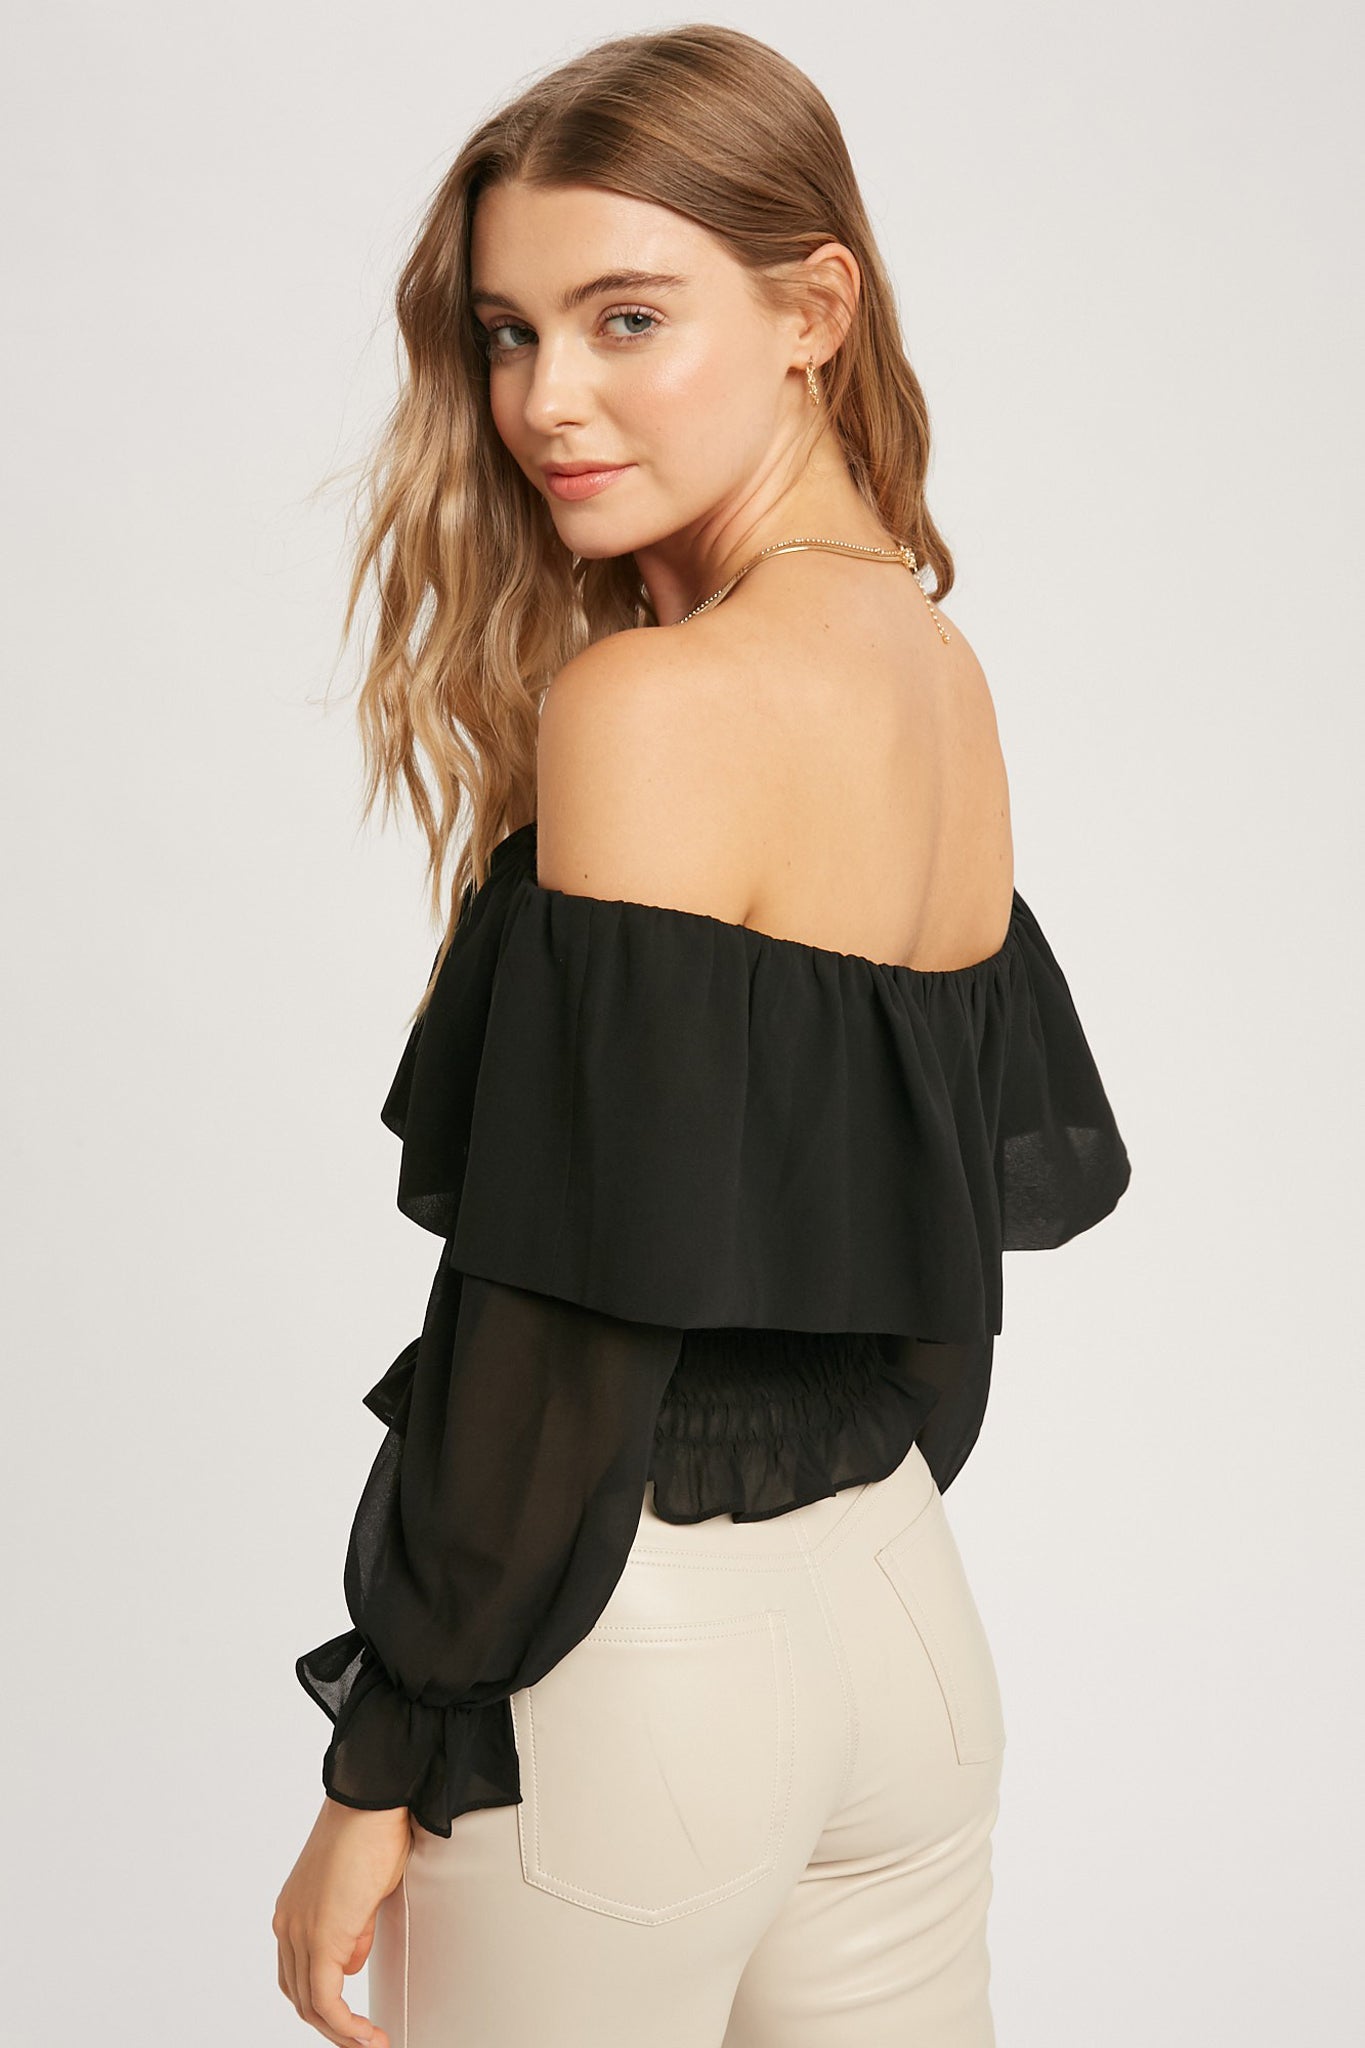 View 4 of Boa Off Shoulder Top, a Tops from Larrea Cove. Detail: .